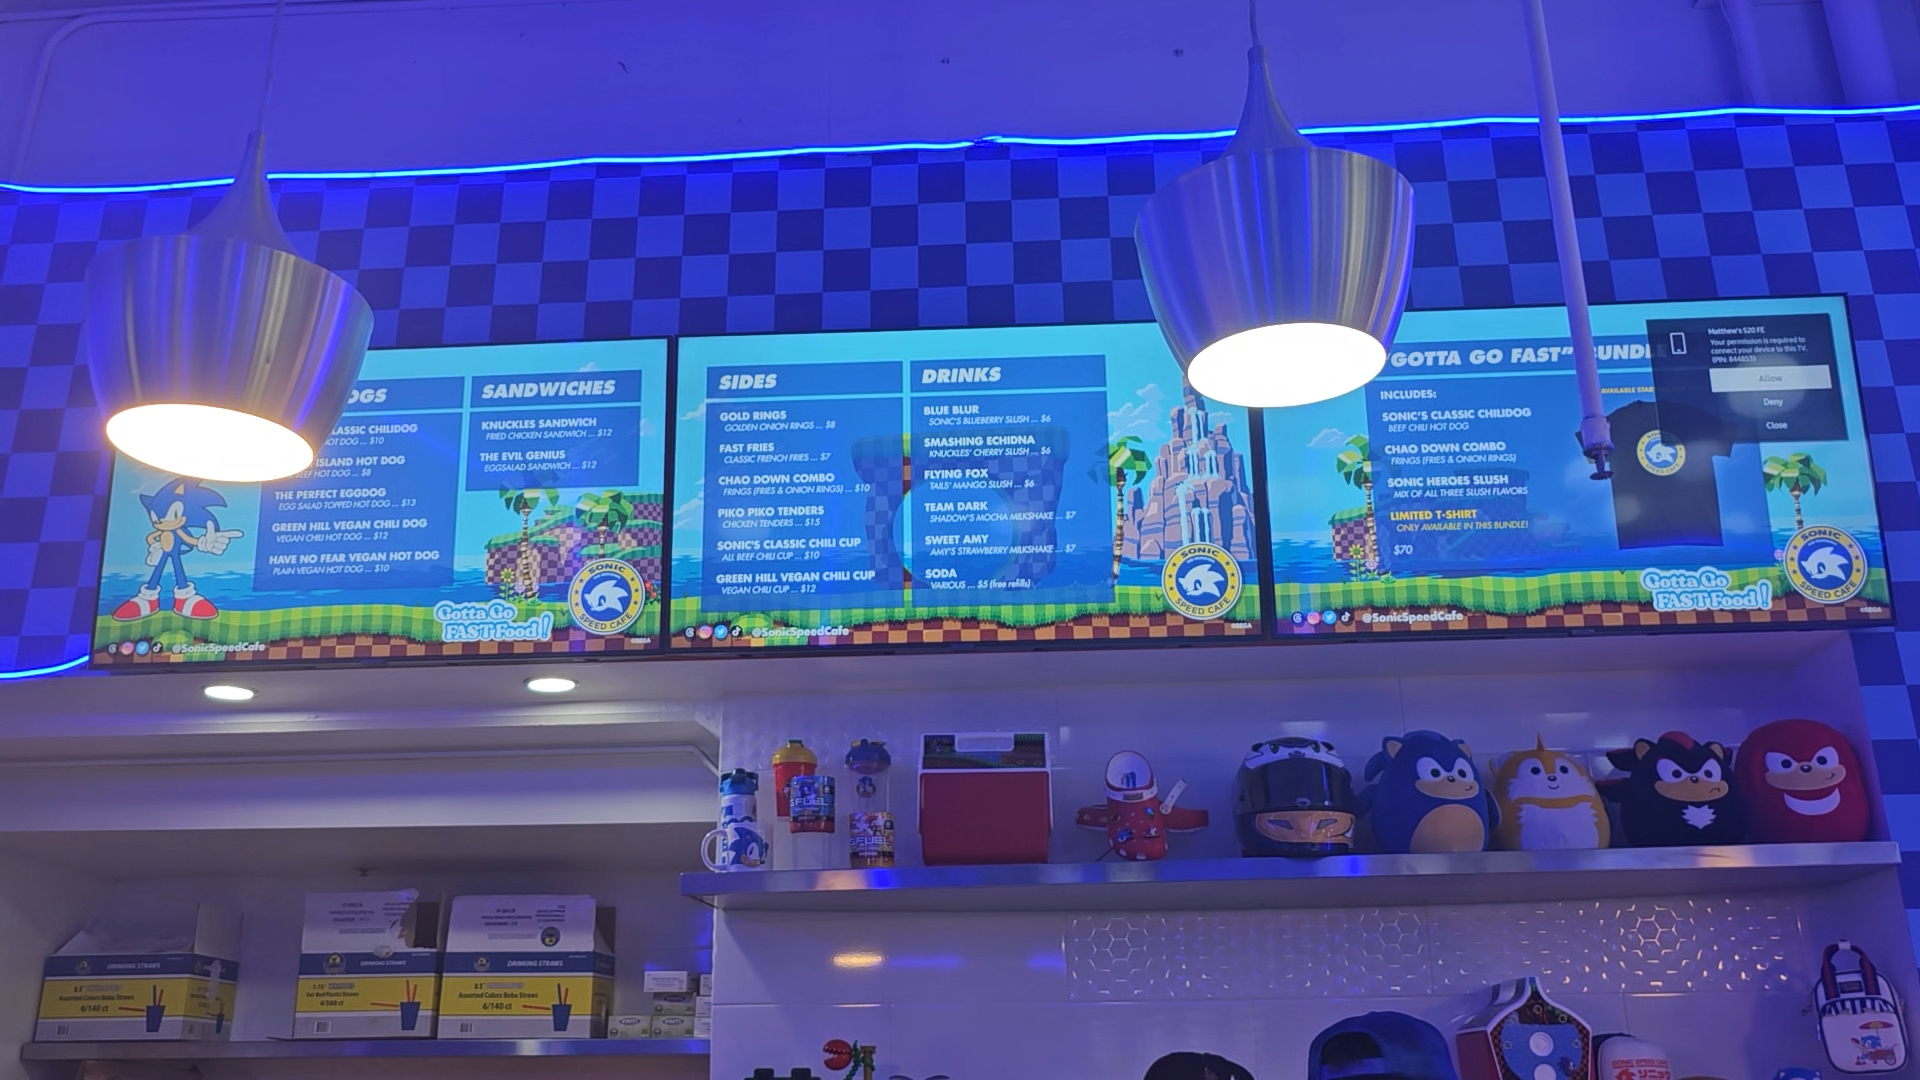 Sonic the Hedgehog Speed Cafe